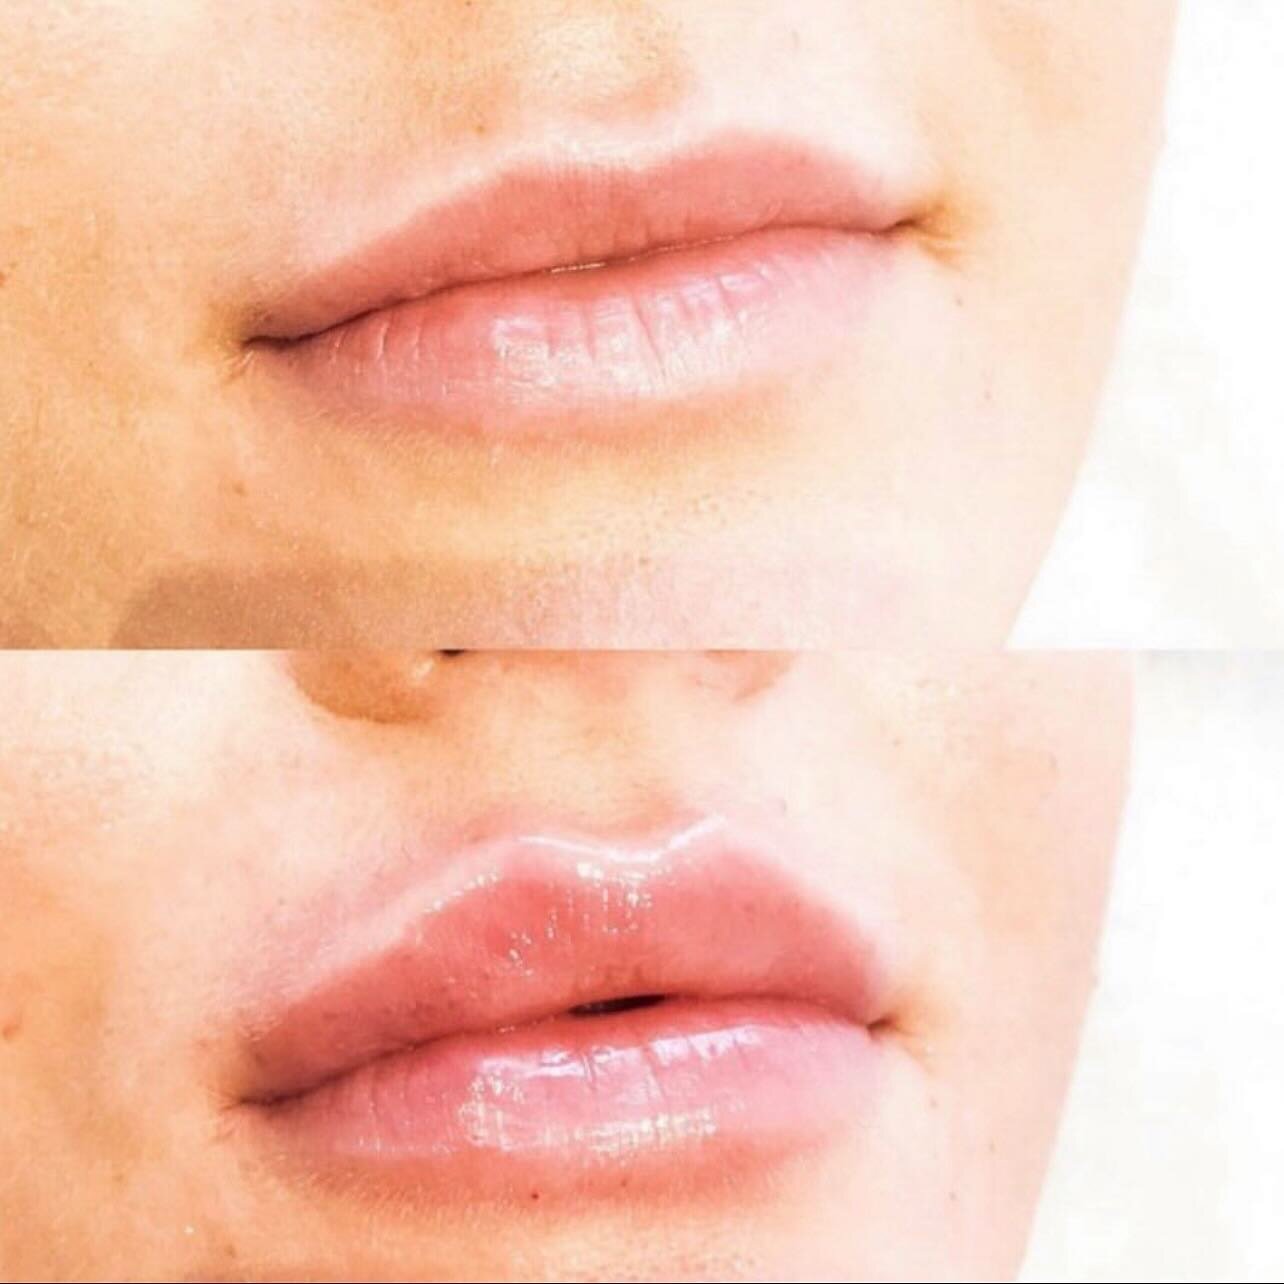 Natural-looking lip filler is best because it provides a subtle enhancement that complements your features, avoids exaggerated results, and ages gracefully over time. It ensures a refreshed appearance without looking overly artificial, contributing t